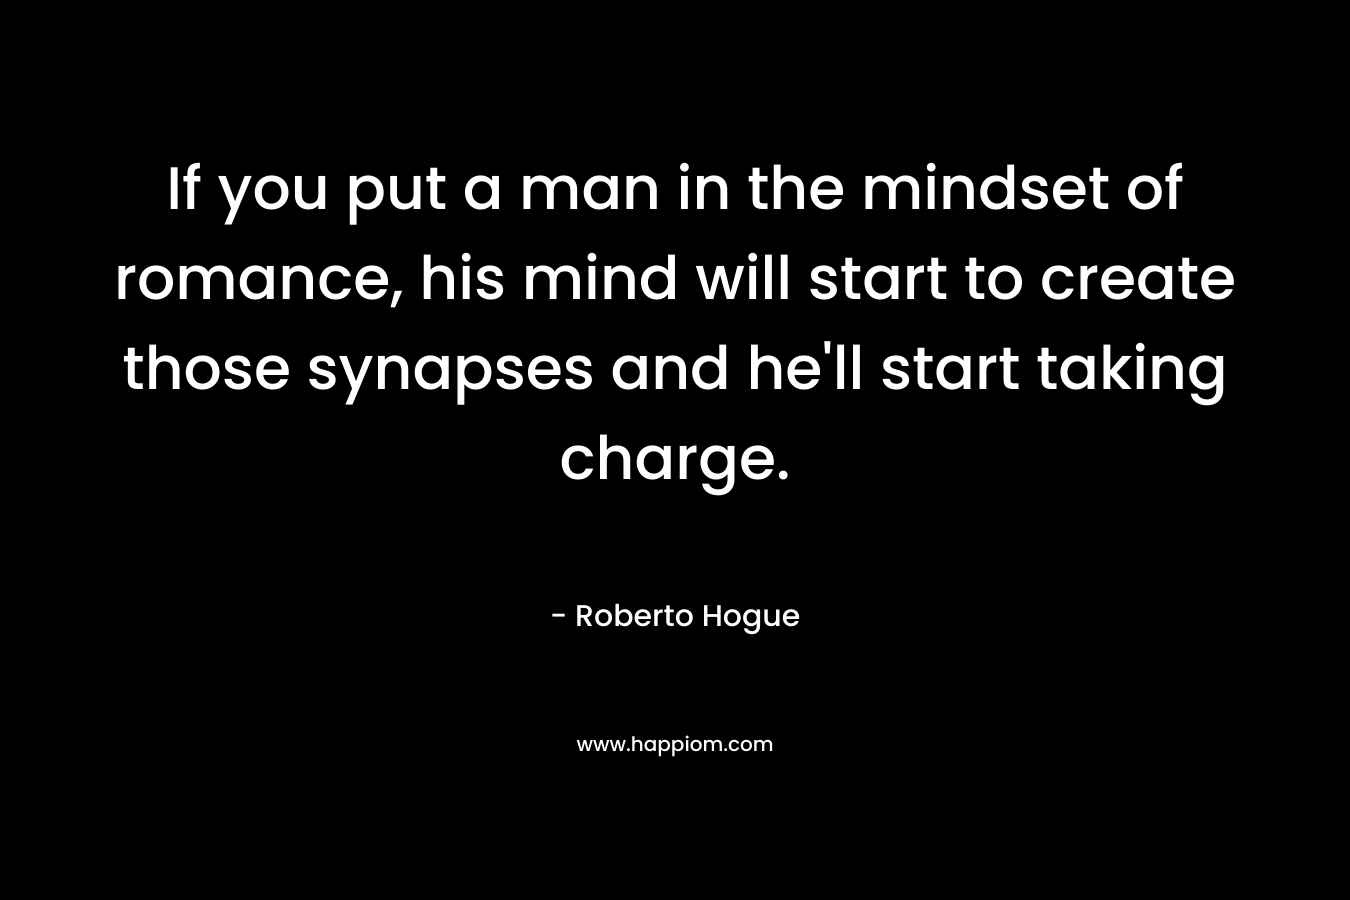 If you put a man in the mindset of romance, his mind will start to create those synapses and he’ll start taking charge. – Roberto Hogue